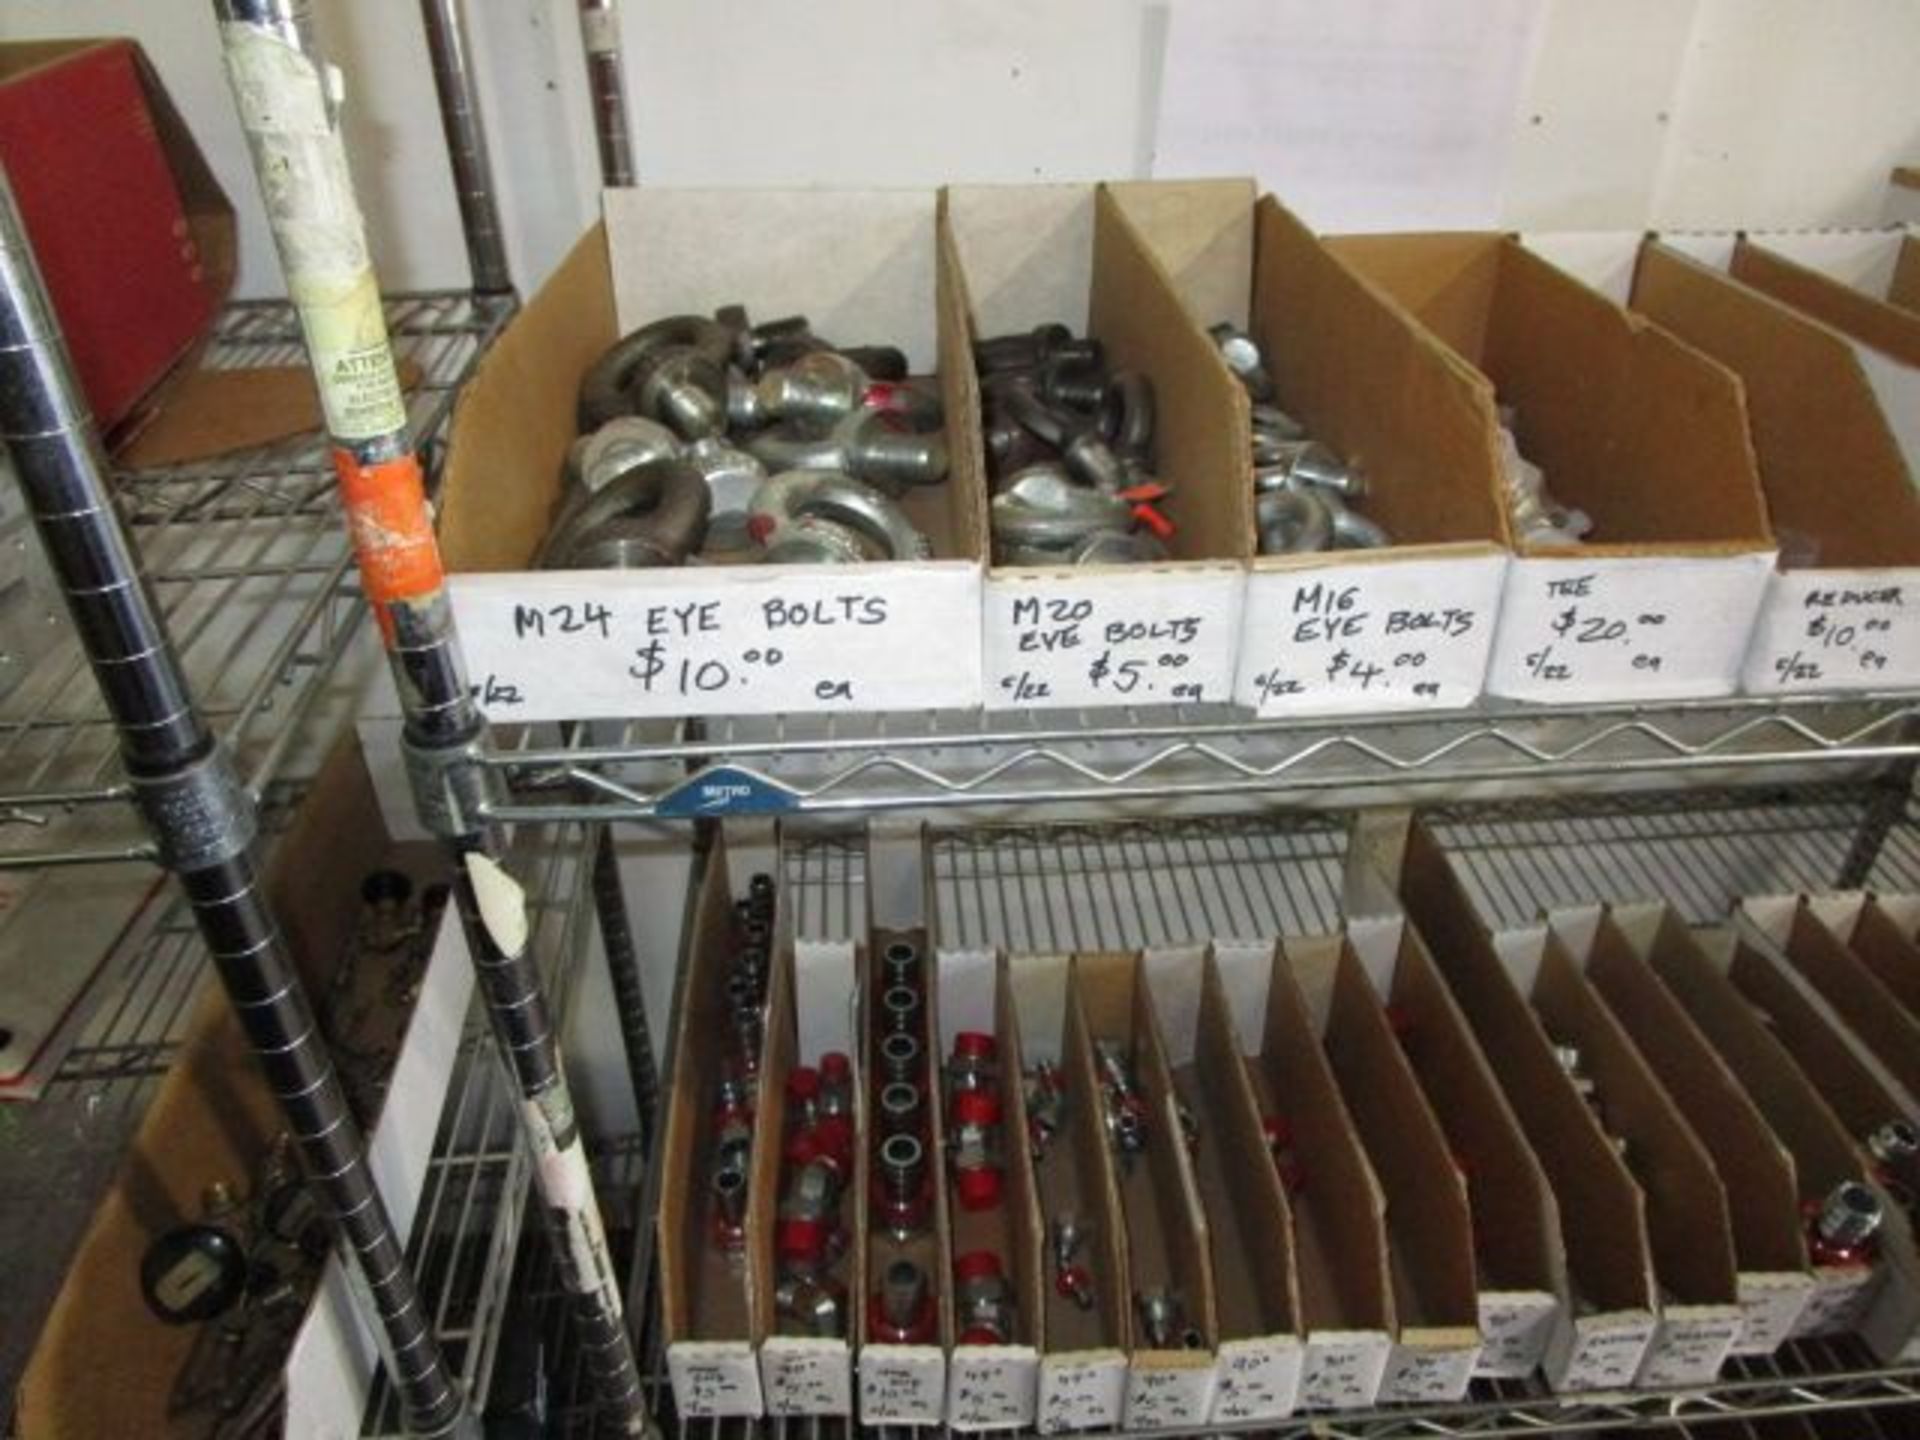 SHELVING UNIT OF BOLTS, QUICK RELEASES, 90 DEGREE CAPS